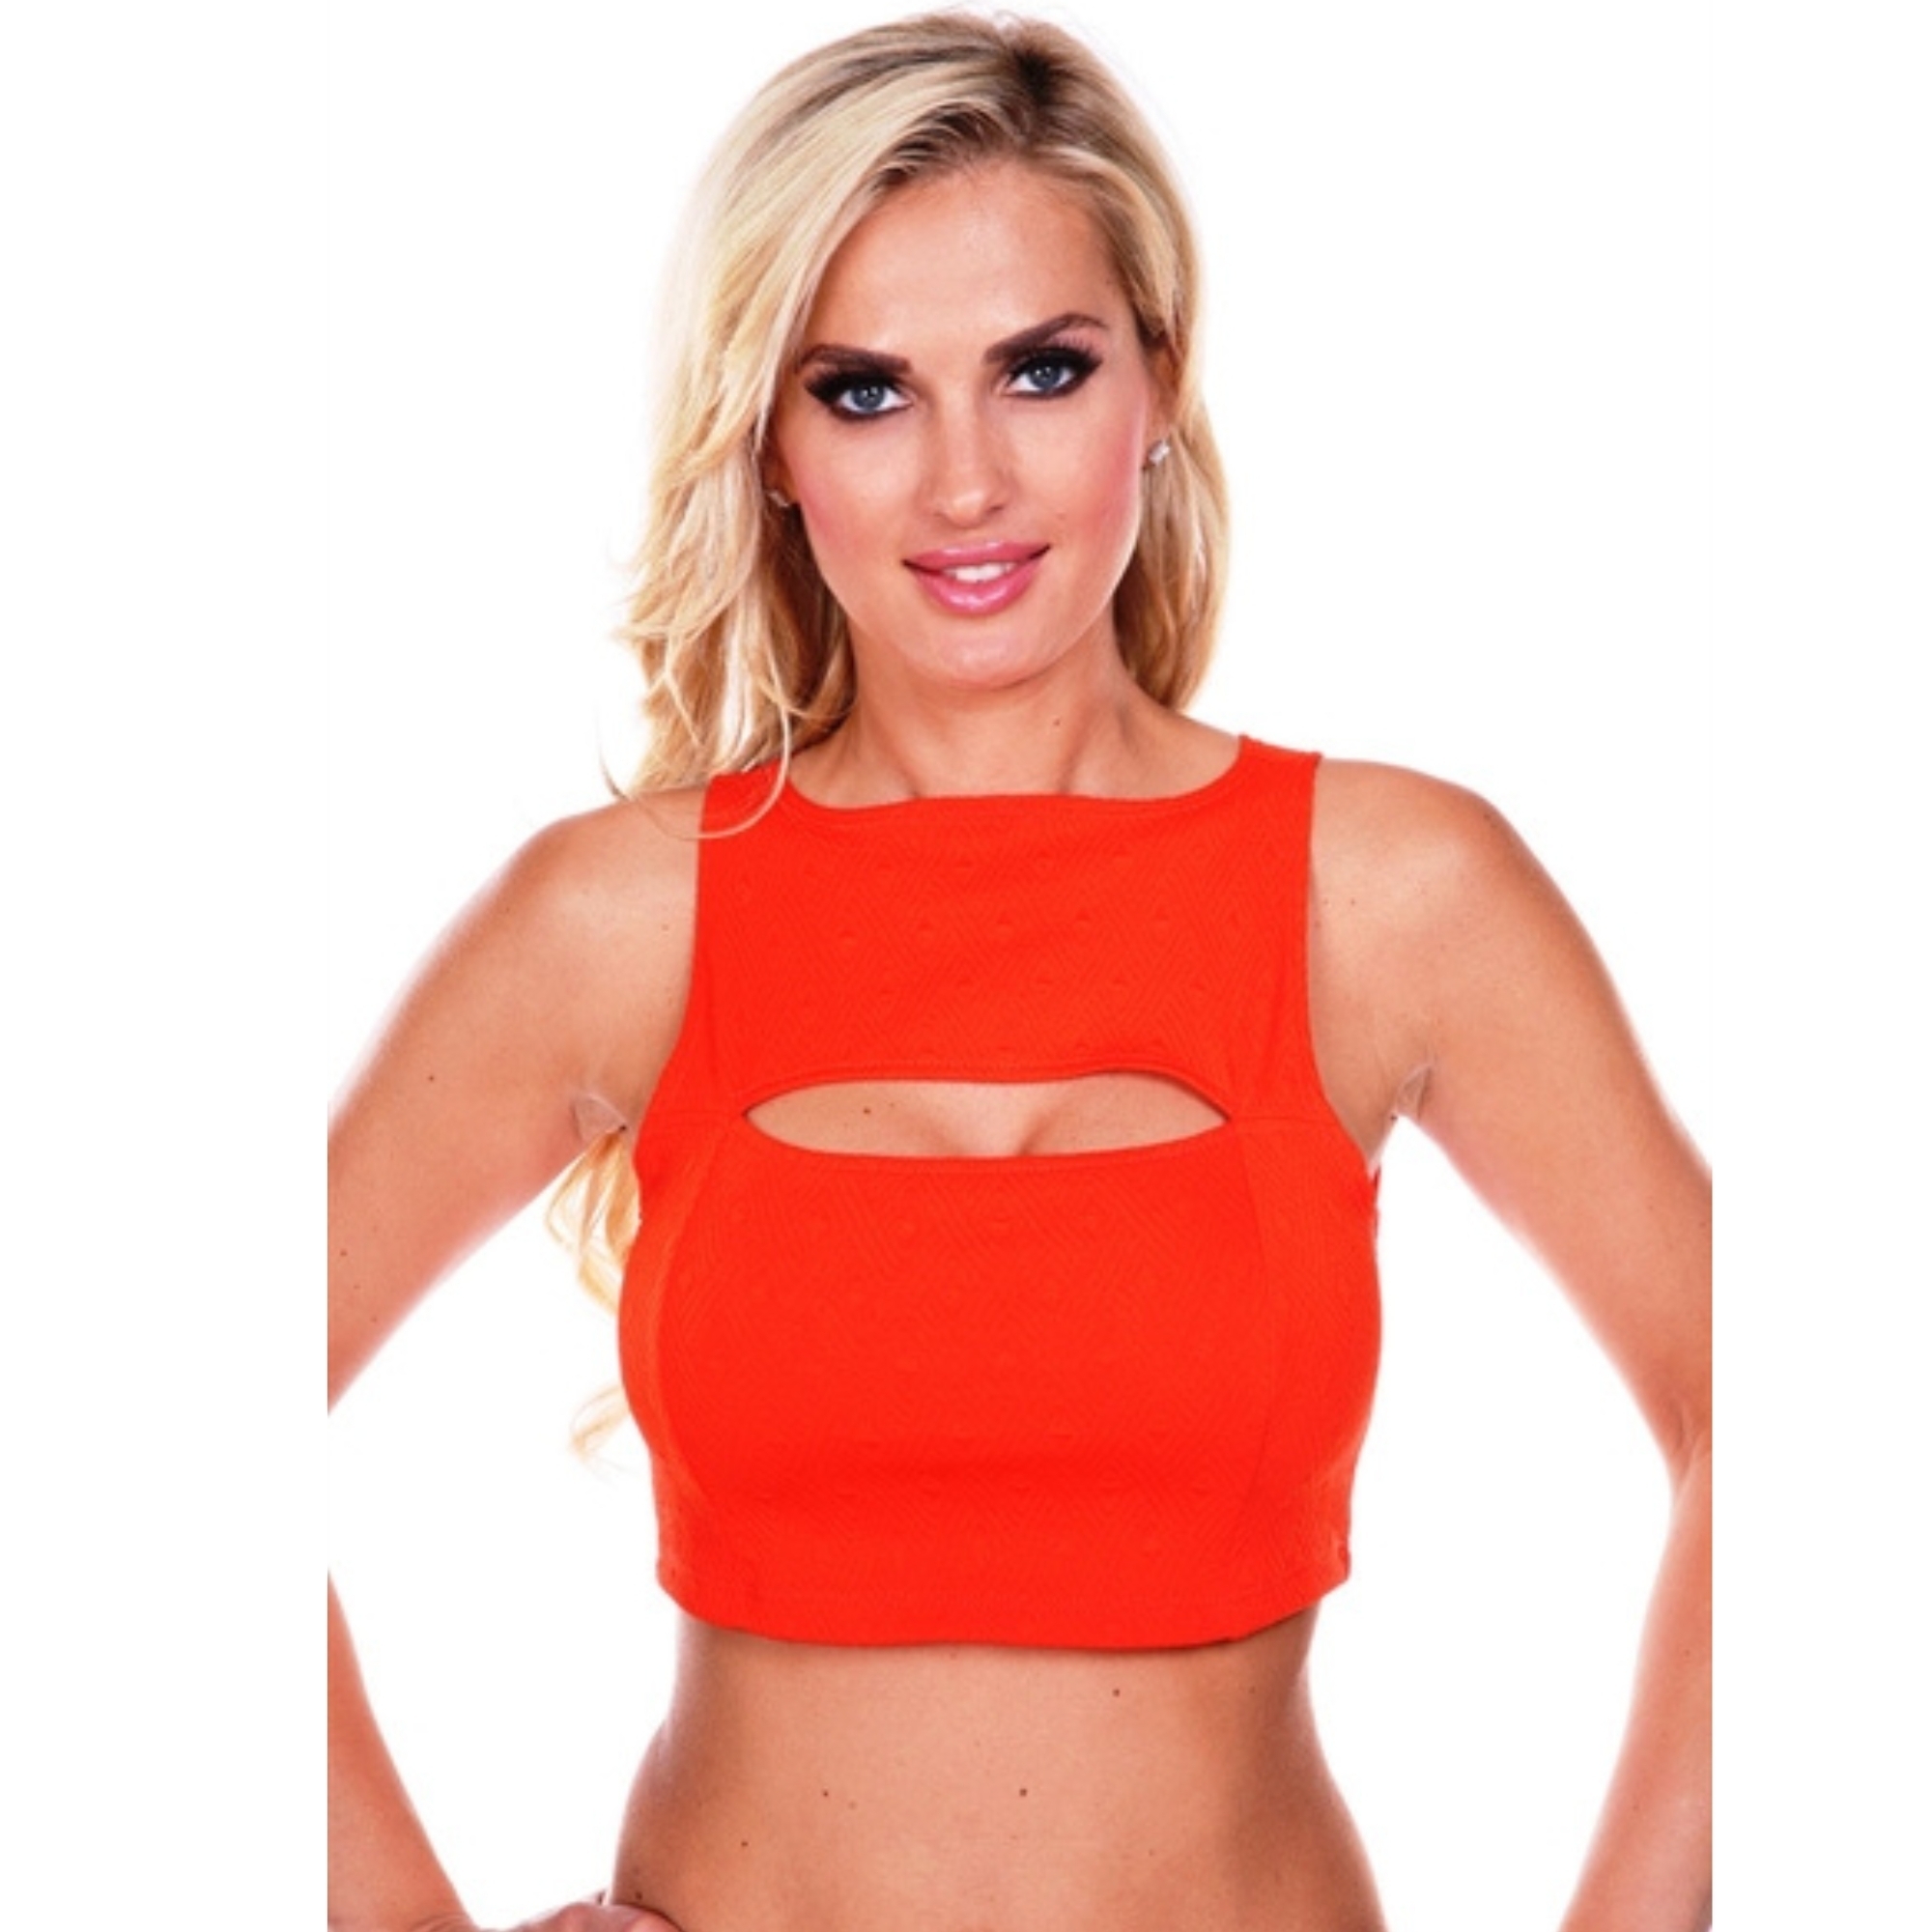 White Mark Women's Crop Top - Coral, Small